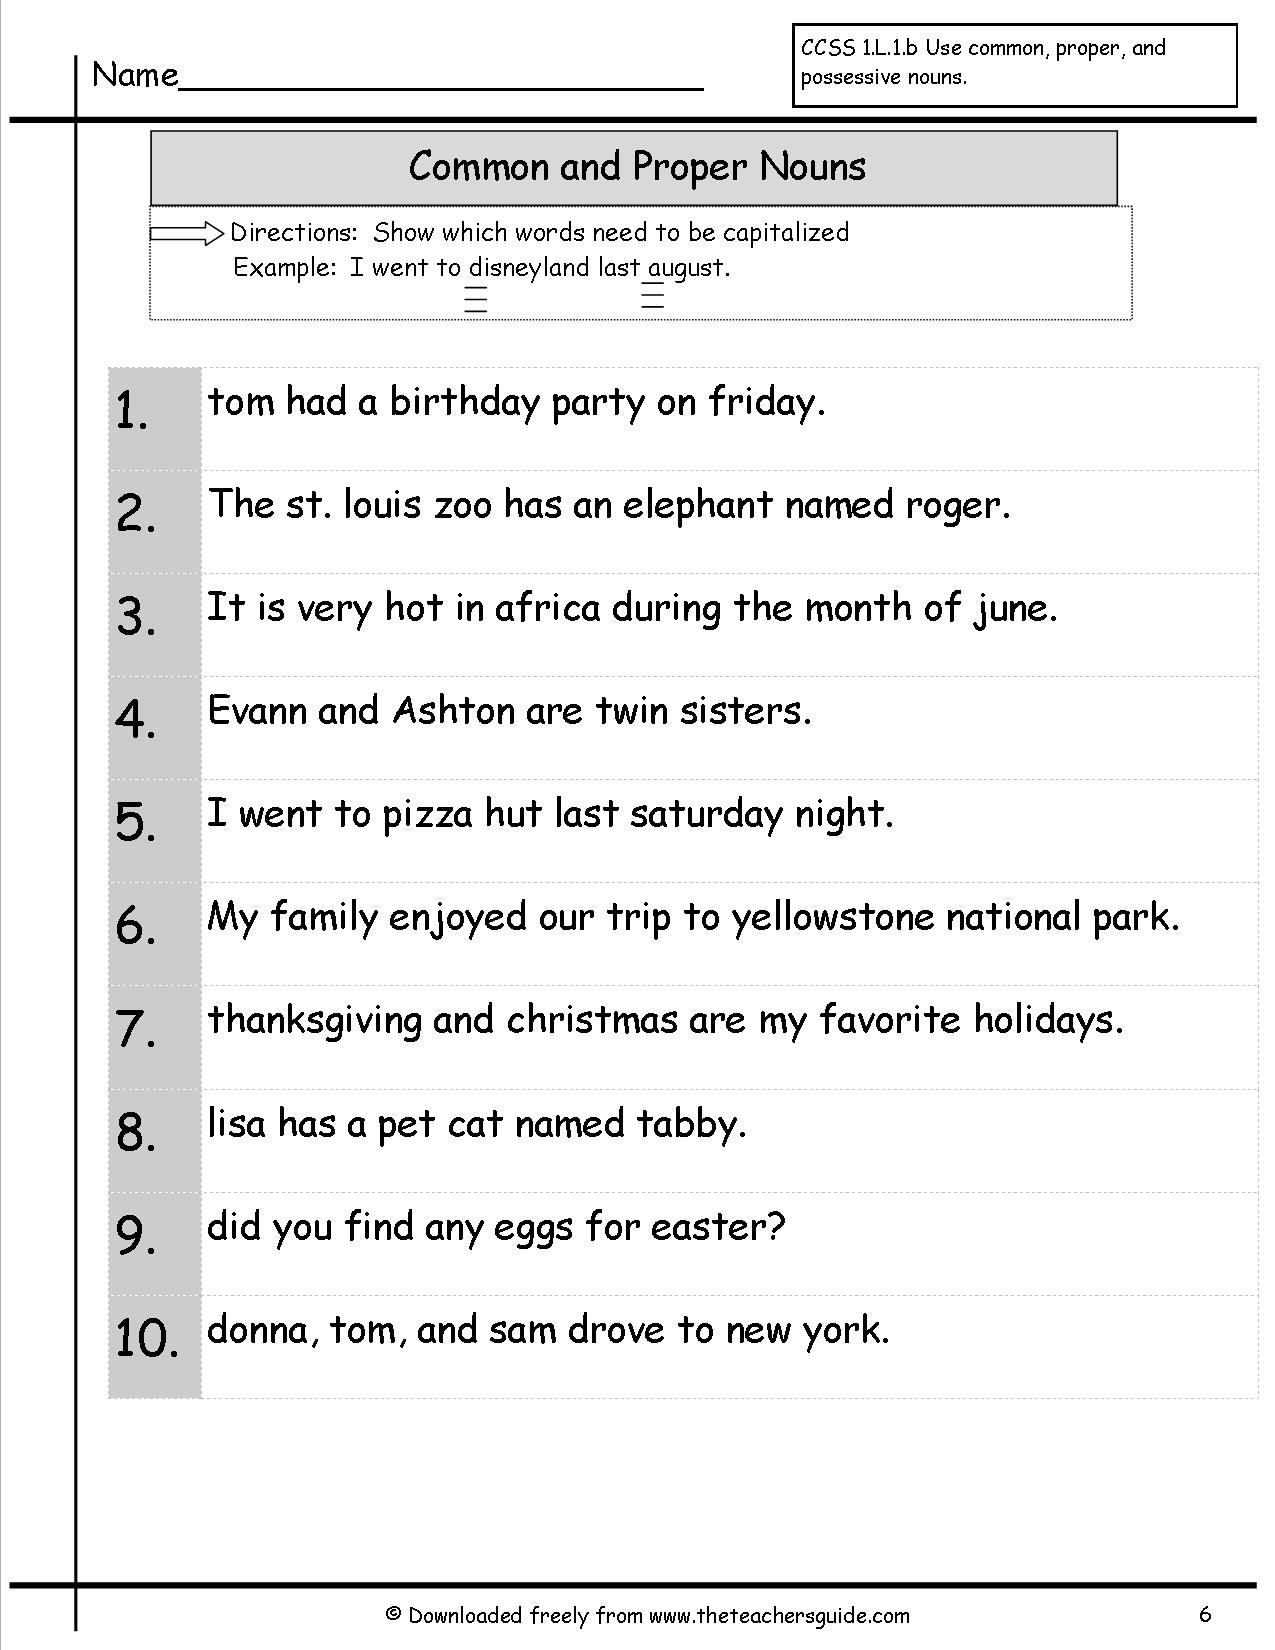 13 Best Images Of Common And Proper Nouns Worksheets Common And 